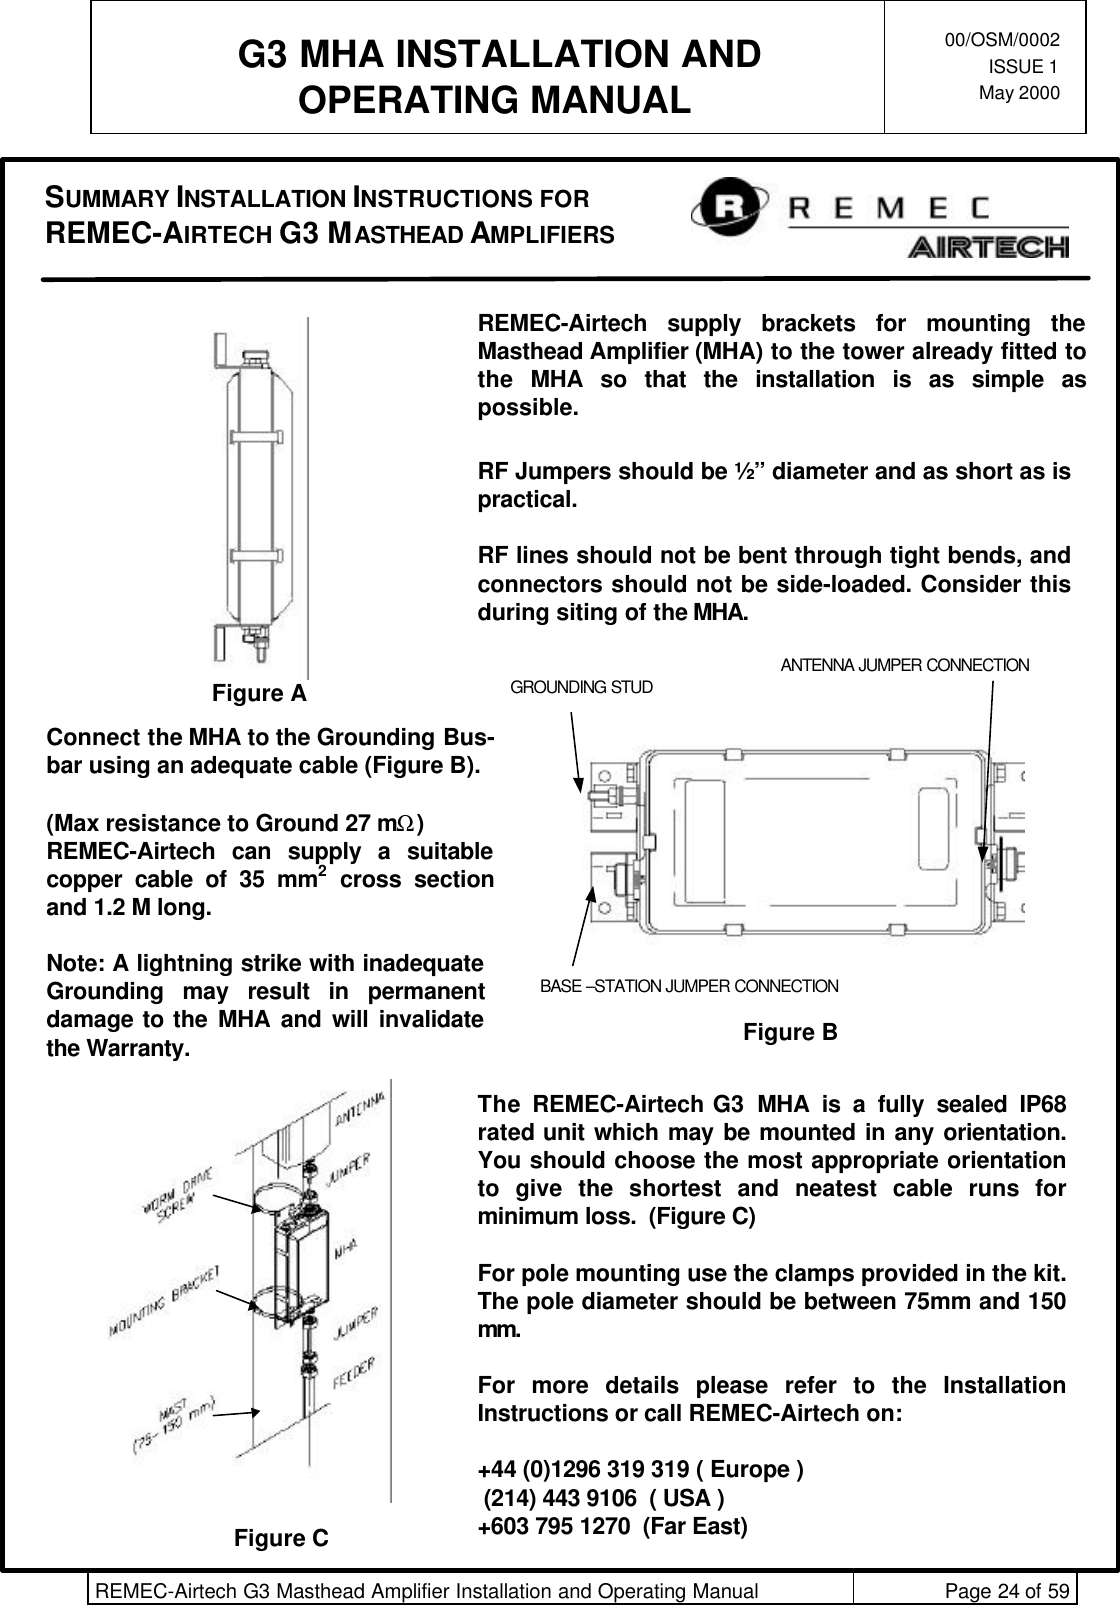  G3 MHA INSTALLATION ANDOPERATING MANUAL00/OSM/0002ISSUE 1May 2000REMEC-Airtech G3 Masthead Amplifier Installation and Operating Manual Page 24 of 59REMEC-Airtech supply brackets for mounting theMasthead Amplifier (MHA) to the tower already fitted tothe  MHA so that the installation is as simple aspossible.RF Jumpers should be ½” diameter and as short as ispractical.RF lines should not be bent through tight bends, andconnectors should not be side-loaded. Consider thisduring siting of the MHA.Figure A GROUNDING STUDBASE –STATION JUMPER CONNECTIONANTENNA JUMPER CONNECTIONFigure BFigure CConnect the MHA to the Grounding Bus-bar using an adequate cable (Figure B).(Max resistance to Ground 27 mΩ)REMEC-Airtech can supply a suitablecopper cable of 35 mm2 cross sectionand 1.2 M long.Note: A lightning strike with inadequateGrounding may result in permanentdamage to the MHA and will invalidatethe Warranty.The REMEC-Airtech G3  MHA is a fully sealed IP68rated unit which may be mounted in any orientation.You should choose the most appropriate orientationto give the shortest and neatest cable runs forminimum loss.  (Figure C)For pole mounting use the clamps provided in the kit.The pole diameter should be between 75mm and 150mm.For more details please refer to the InstallationInstructions or call REMEC-Airtech on:+44 (0)1296 319 319 ( Europe ) (214) 443 9106  ( USA )+603 795 1270  (Far East)SUMMARY INSTALLATION INSTRUCTIONS FORREMEC-AIRTECH G3 MASTHEAD AMPLIFIERS